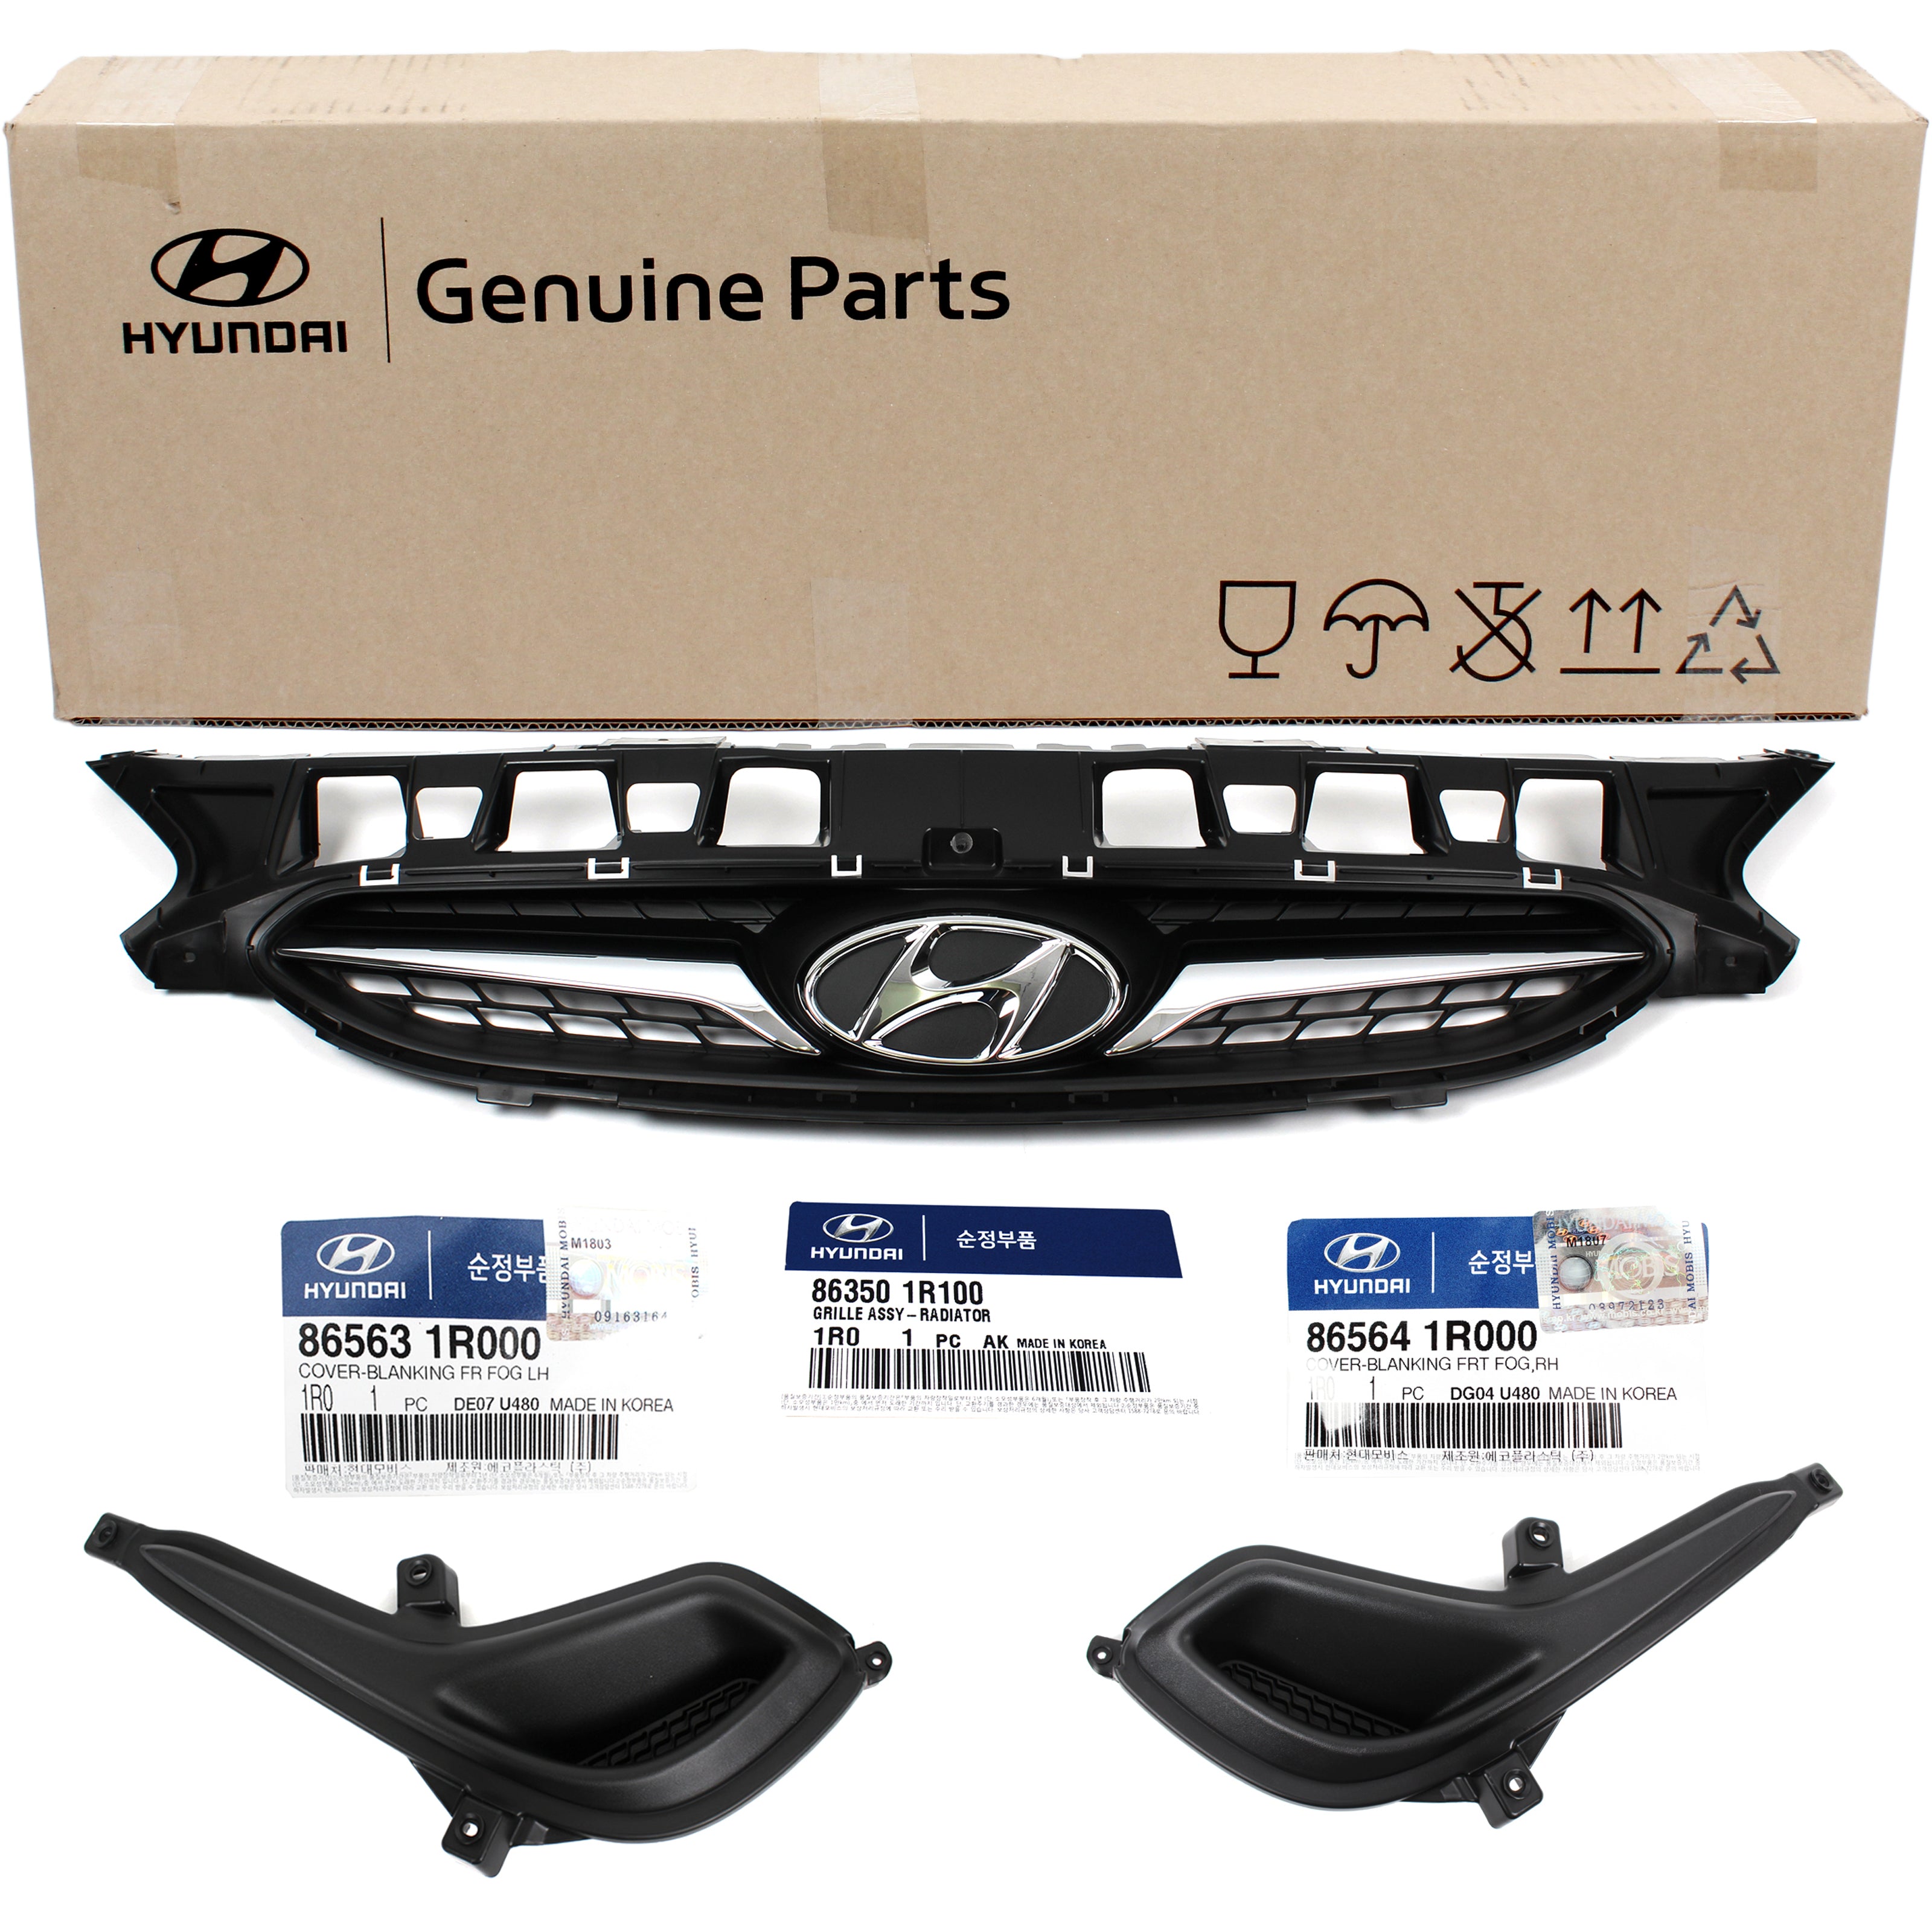 GENUINE Front Grille & Fog lamp Covers for 12-14 Hyundai Accent 863501 -  True Green Parts